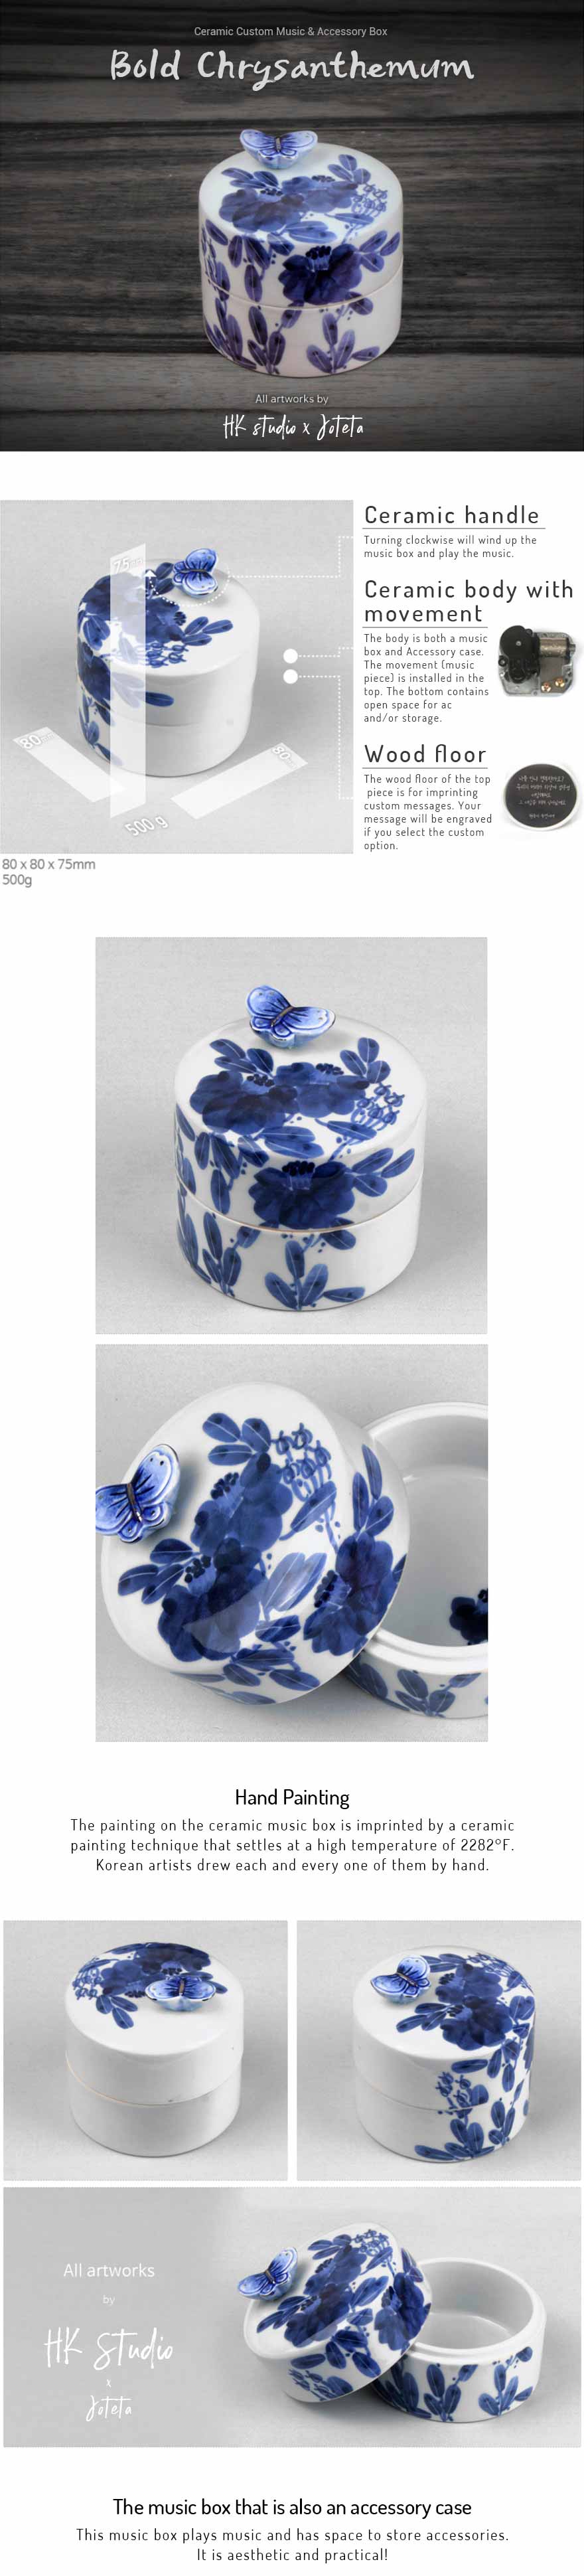 Bold Chrysanthemum Ceramic Custom Music Box that you can fully personalize by choosing your own tune and special message to engrave within the top piece of the music box.